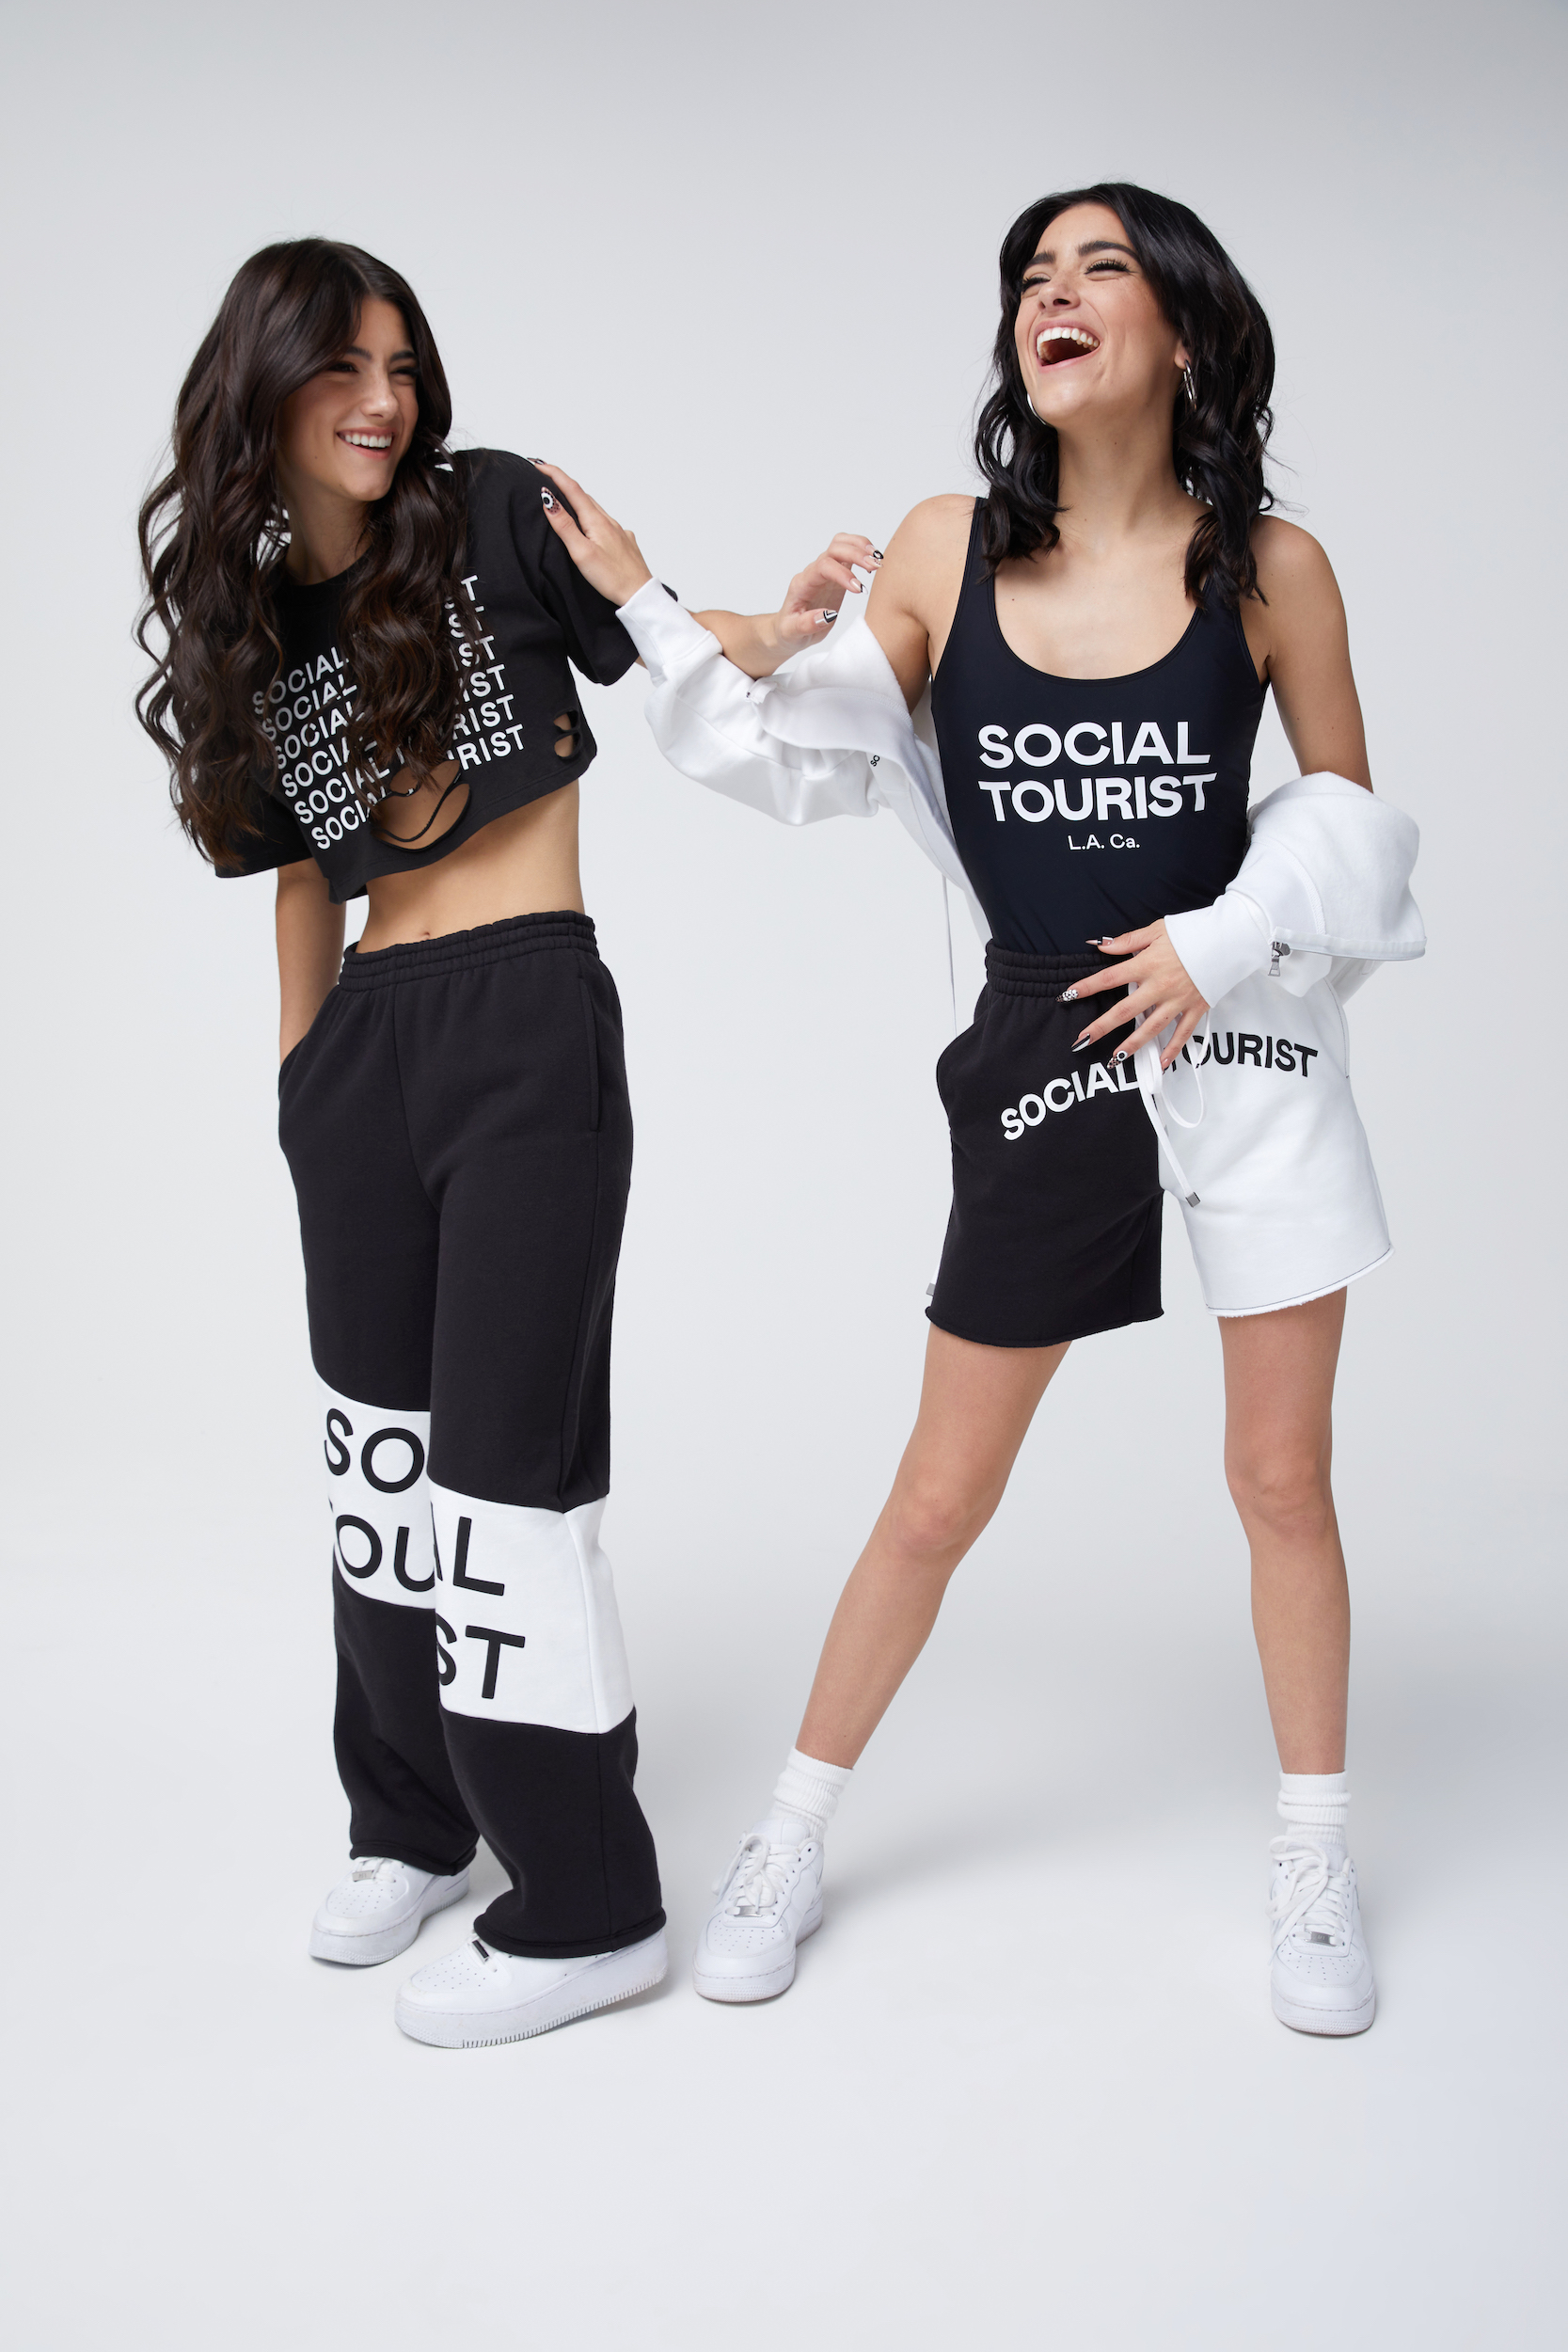 Charli and Dixie D’Amelio Launch Social Tourist Athleisure Line - V